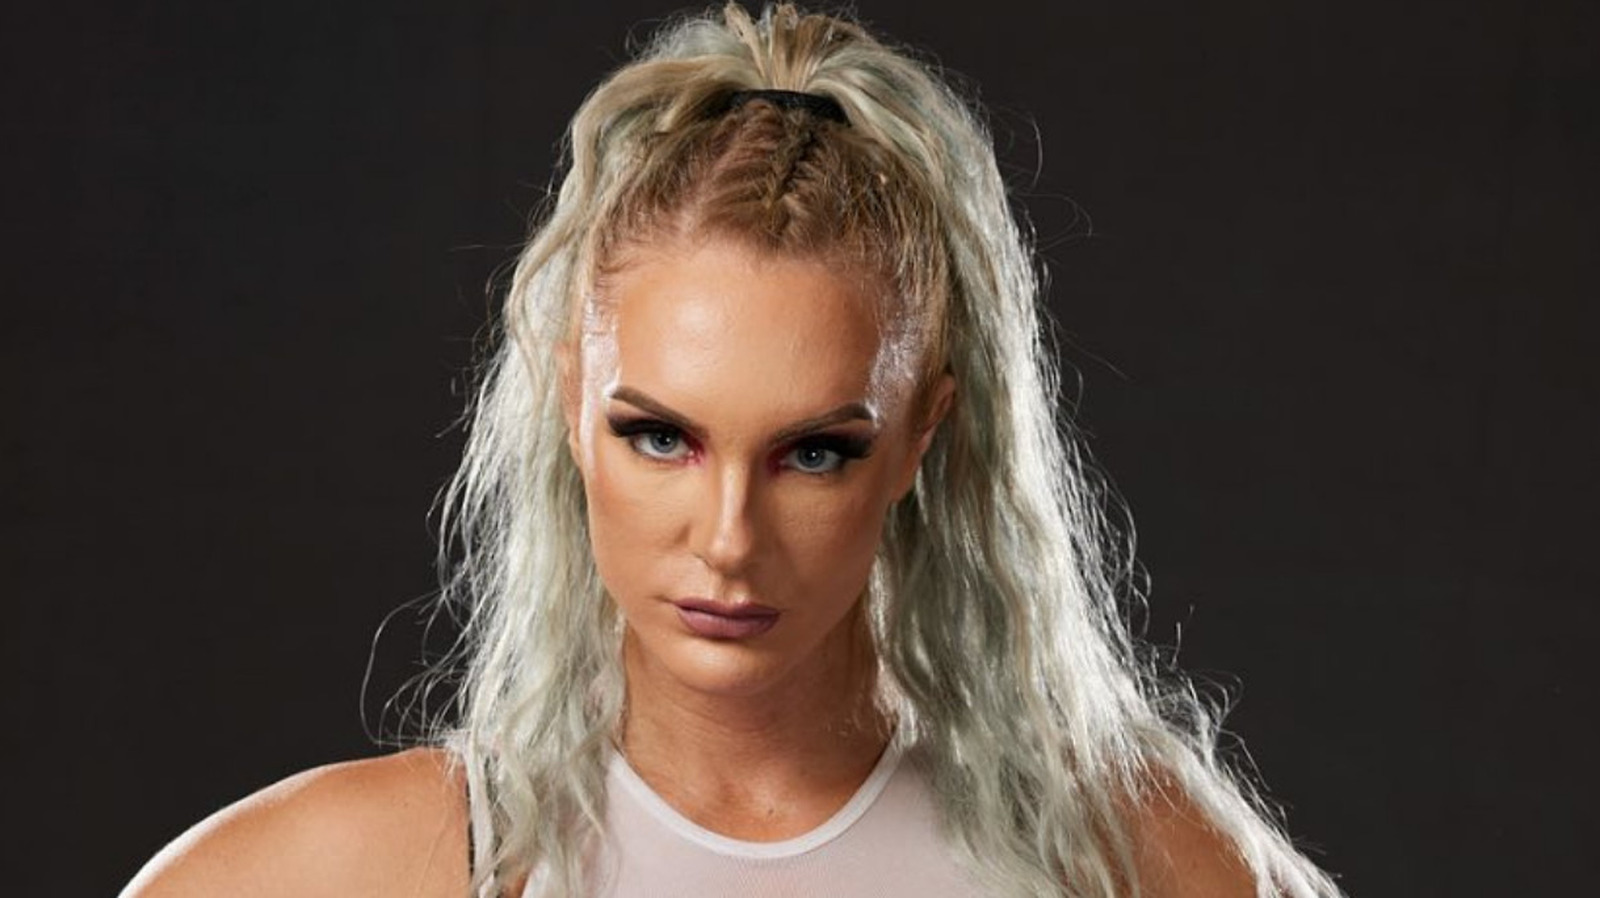 Kamille Believes NWA Will Put On Another All-Women PPV, Possibly This Year